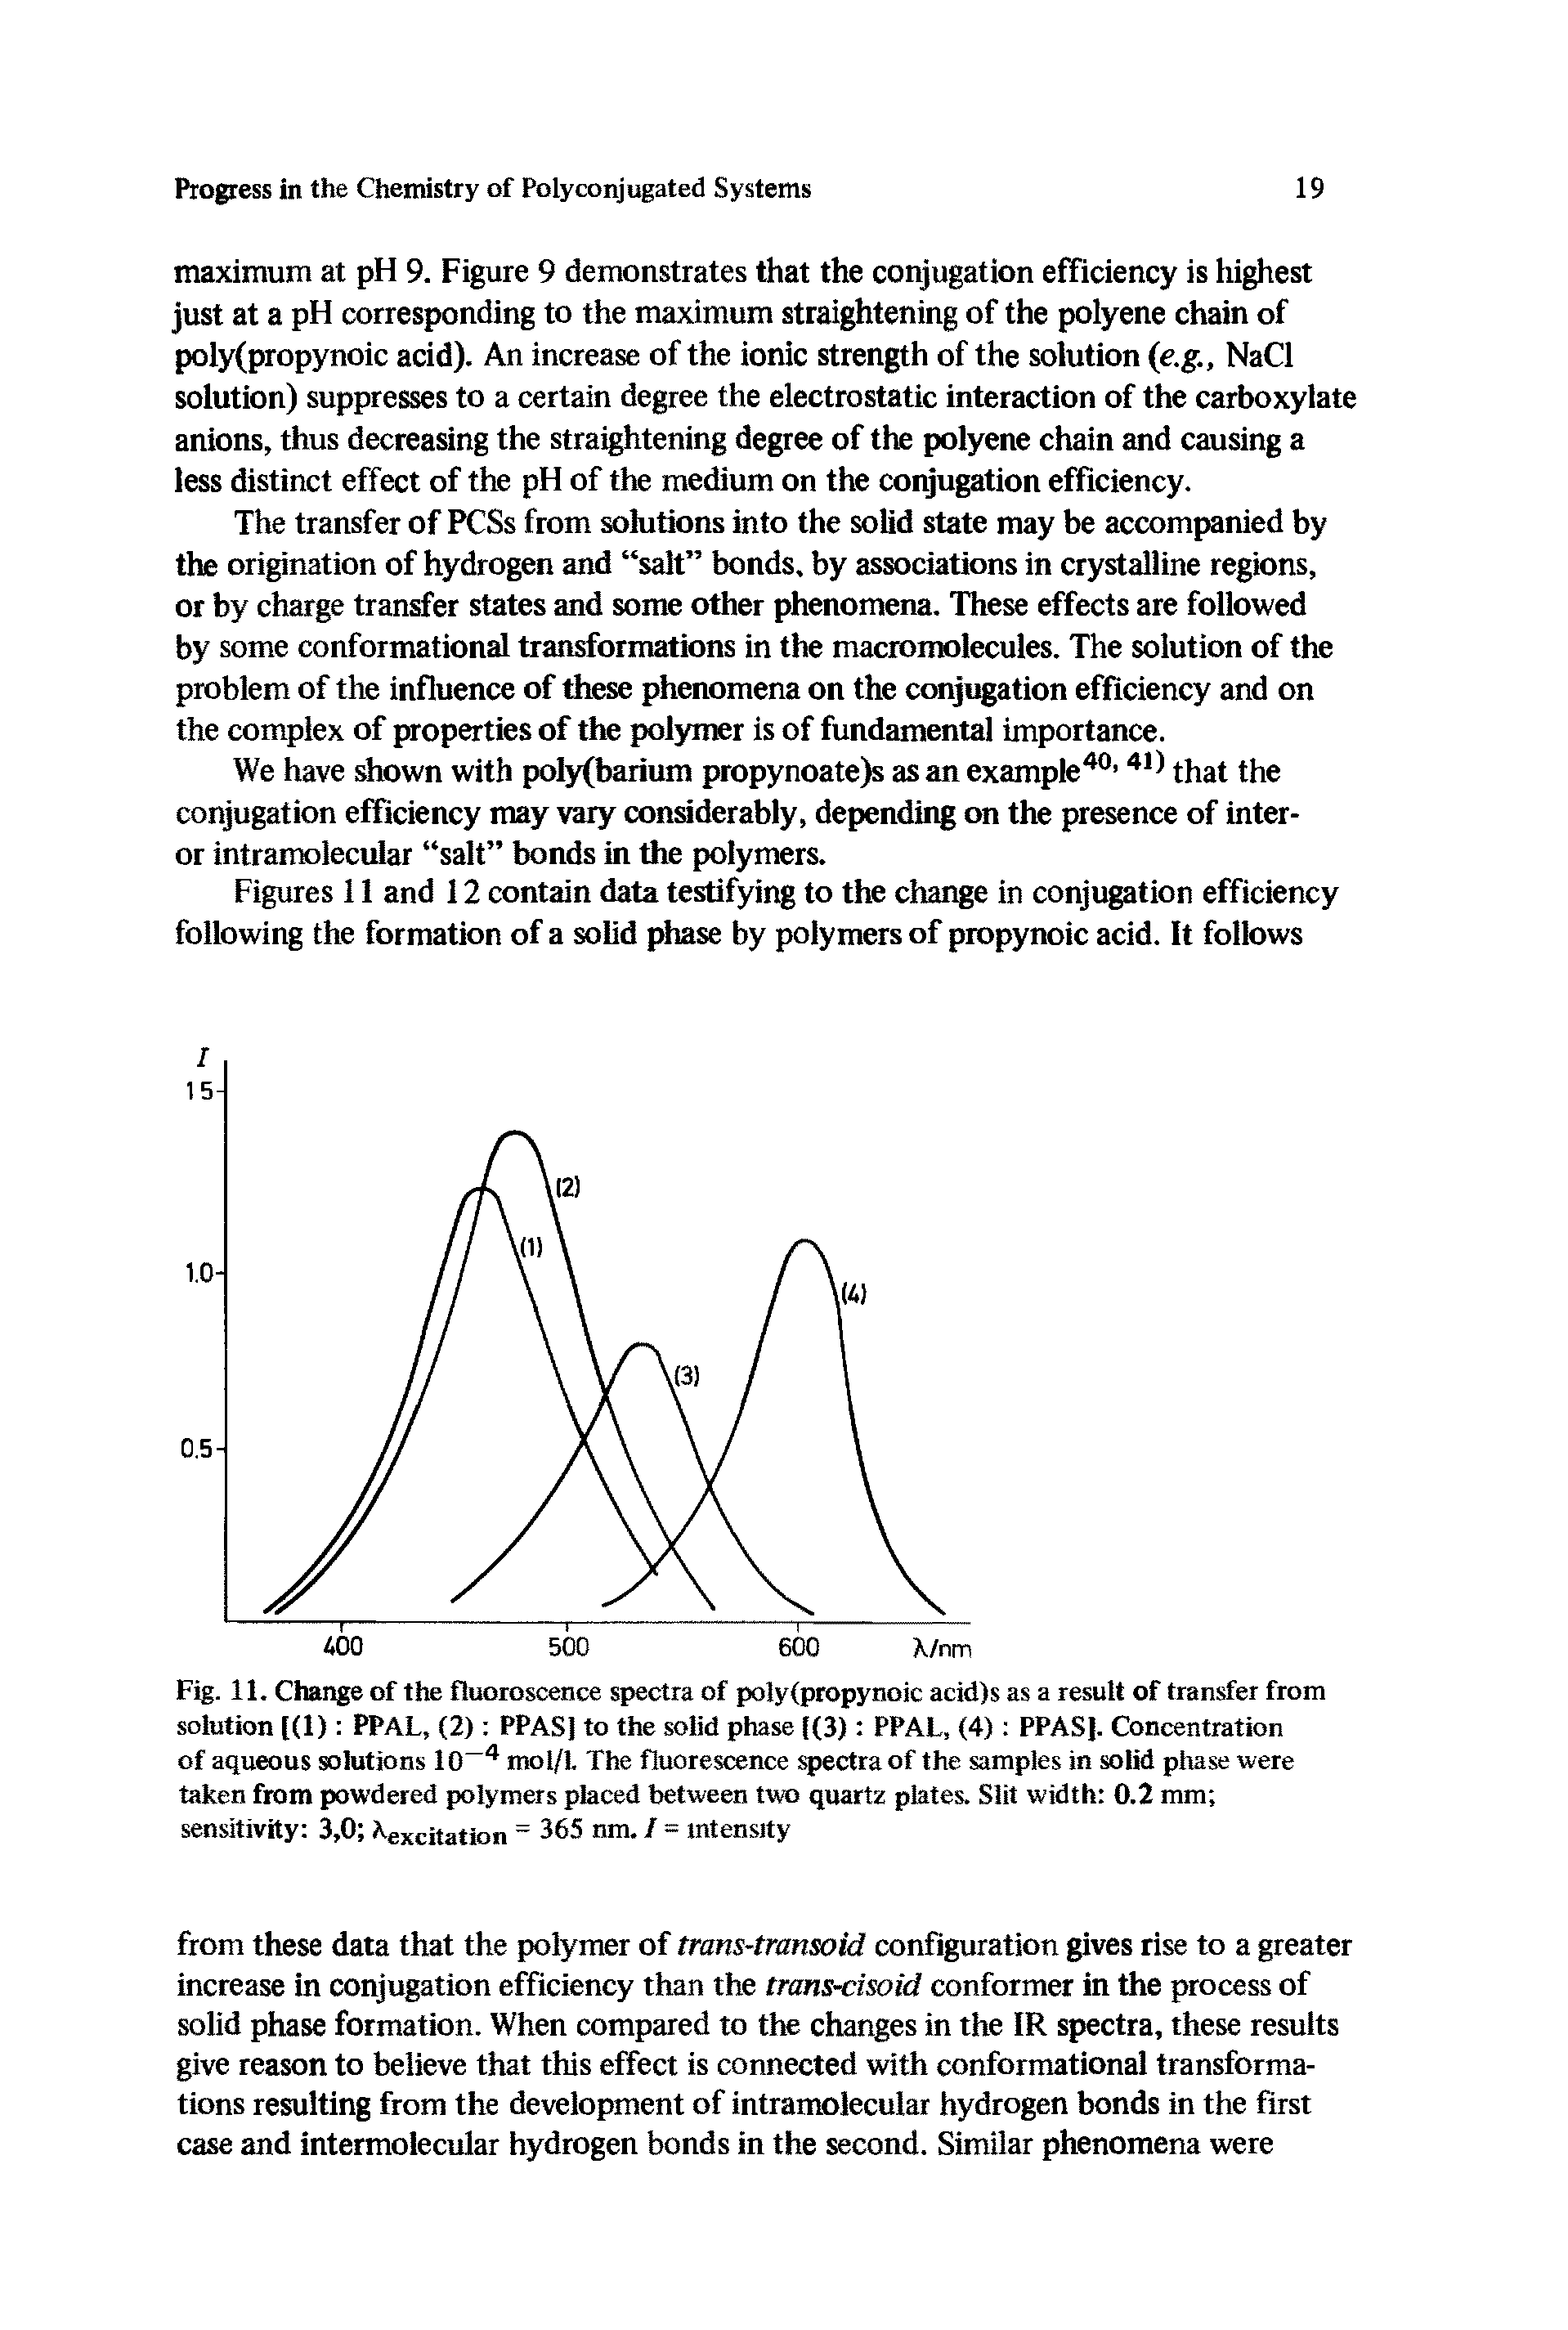 Fig. 11. Change of the fluorescence spectra of polyfpropynoic acid)s as a result of transfer from solution [(1) PPAL, (2) PPASJ to the solid phase [(3) PPAL, (4) PPASJ. Concentration of aqueous solutions 10 4 mol/1. The fluorescence spectra of the samples in solid phase were taken from powdered polymers placed between two quartz plates. Slit width 0.2 mm sensitivity 3,0 excitation = 365 nm. / = intensity...